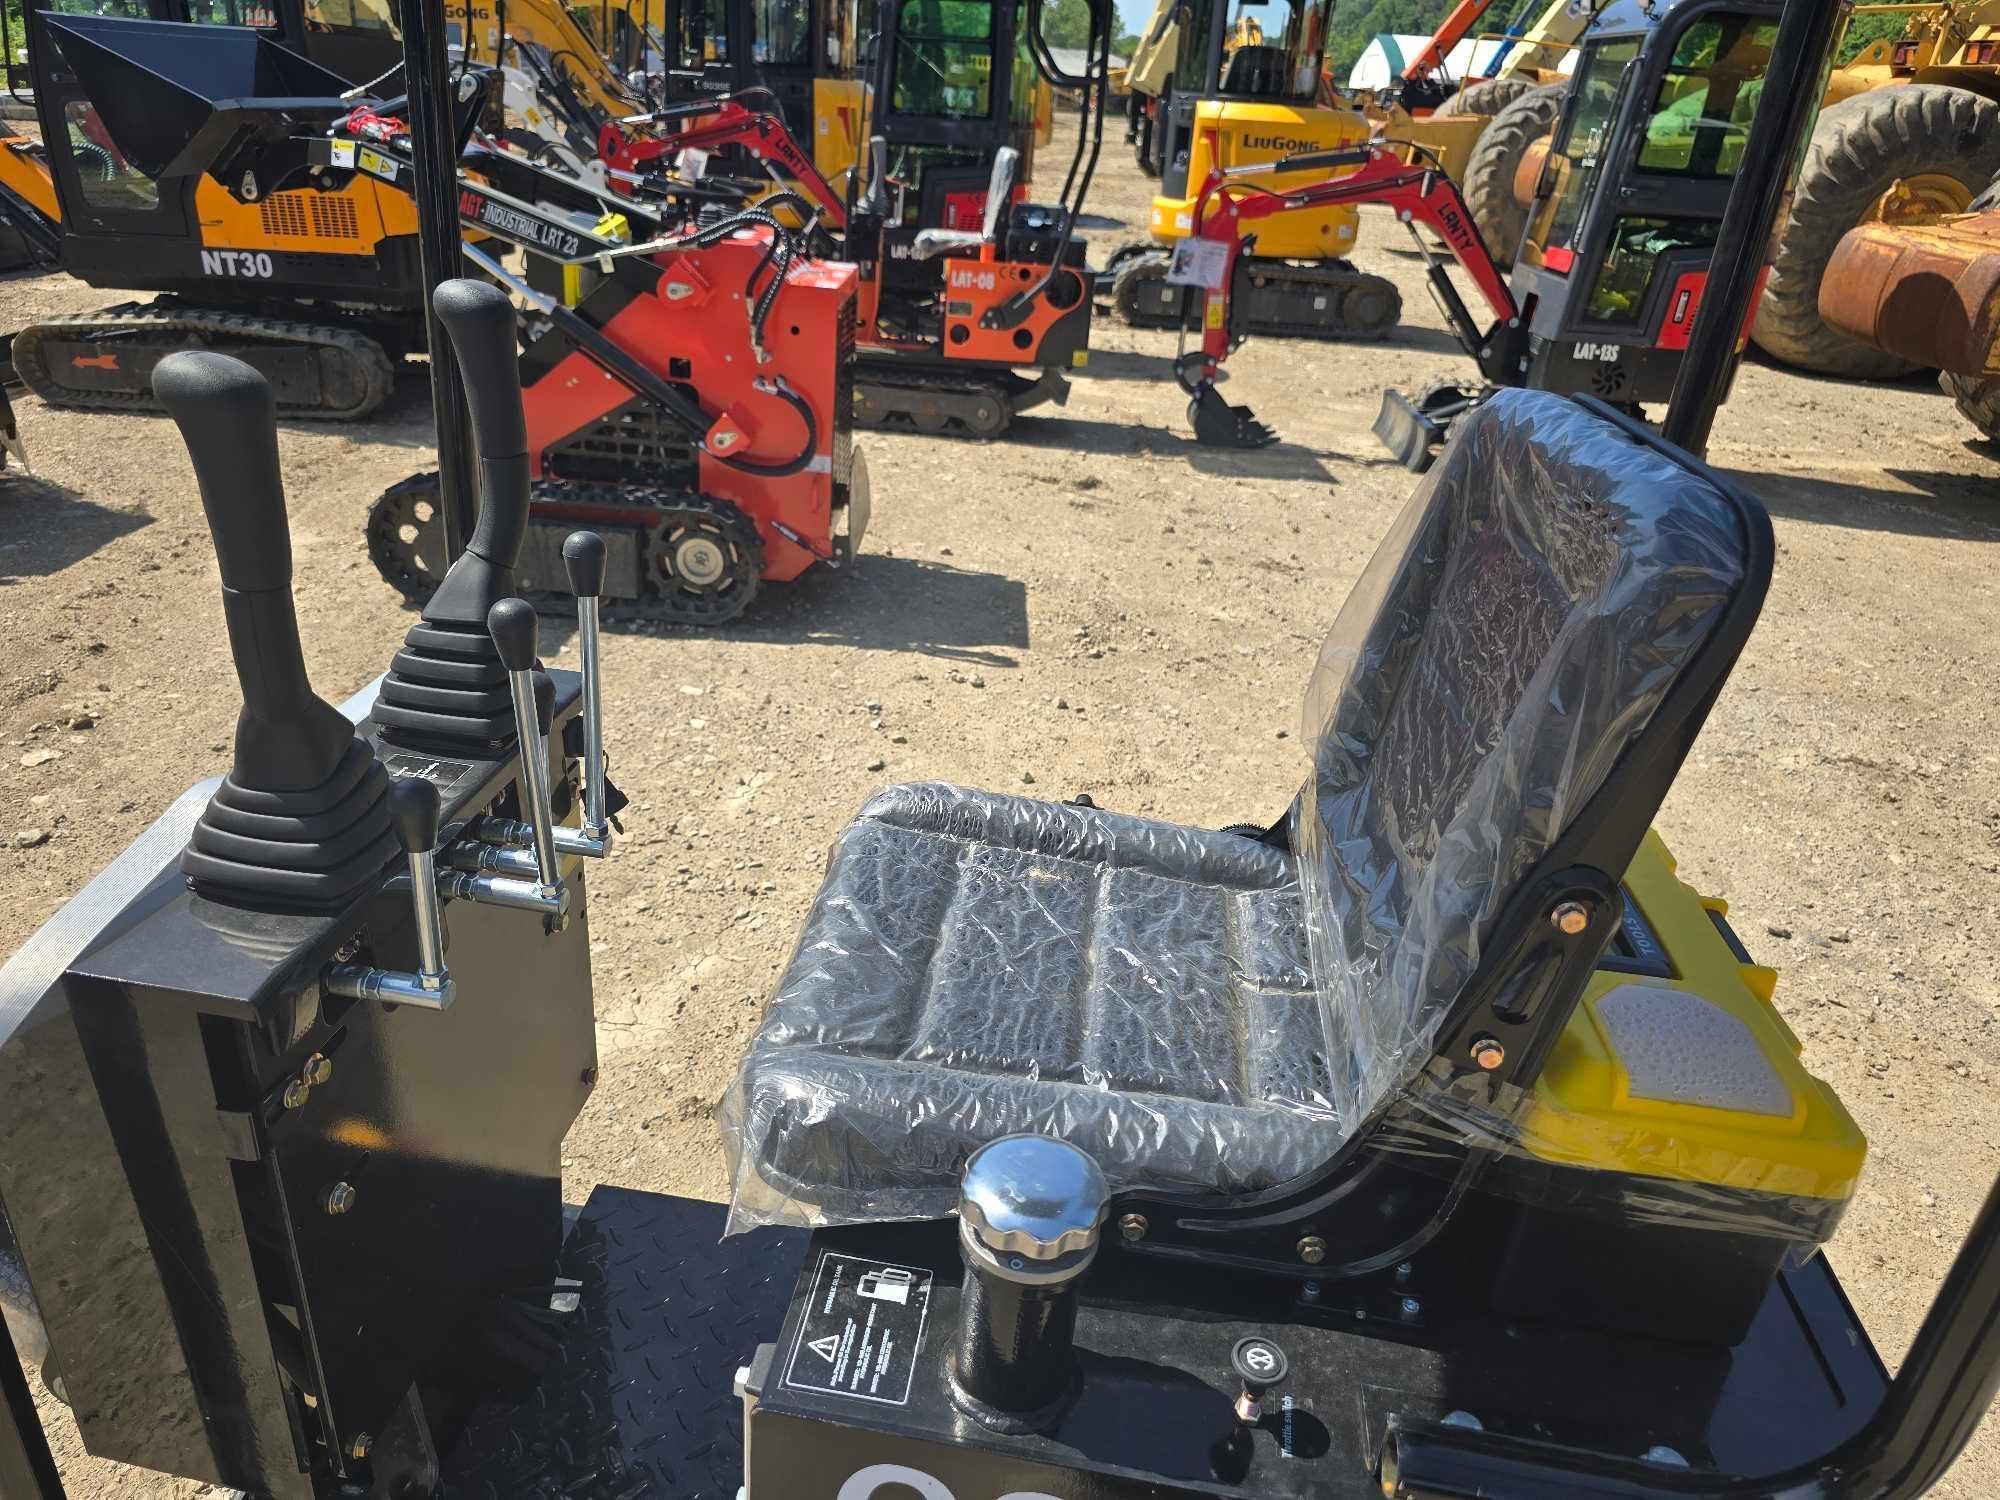 NEW AGT QS12R HYDRAULIC EXCAVATOR SN-017850, powered by Briggs & Stratton gas engine, equipped with